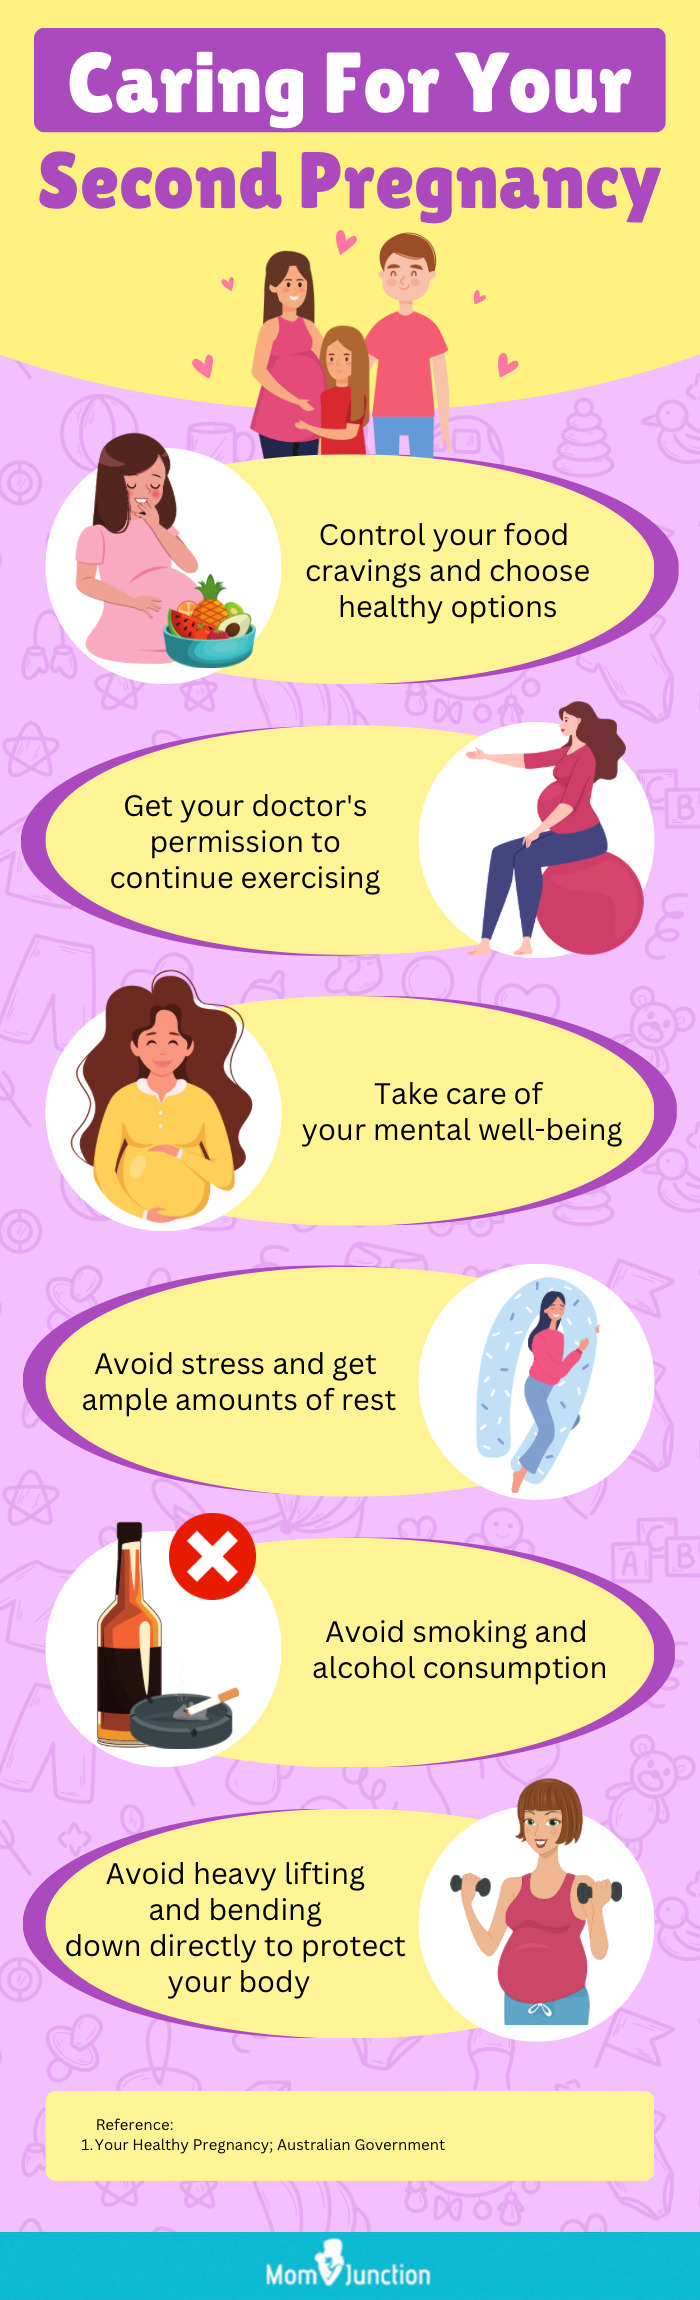 extra care during the second pregnancy (infographic)